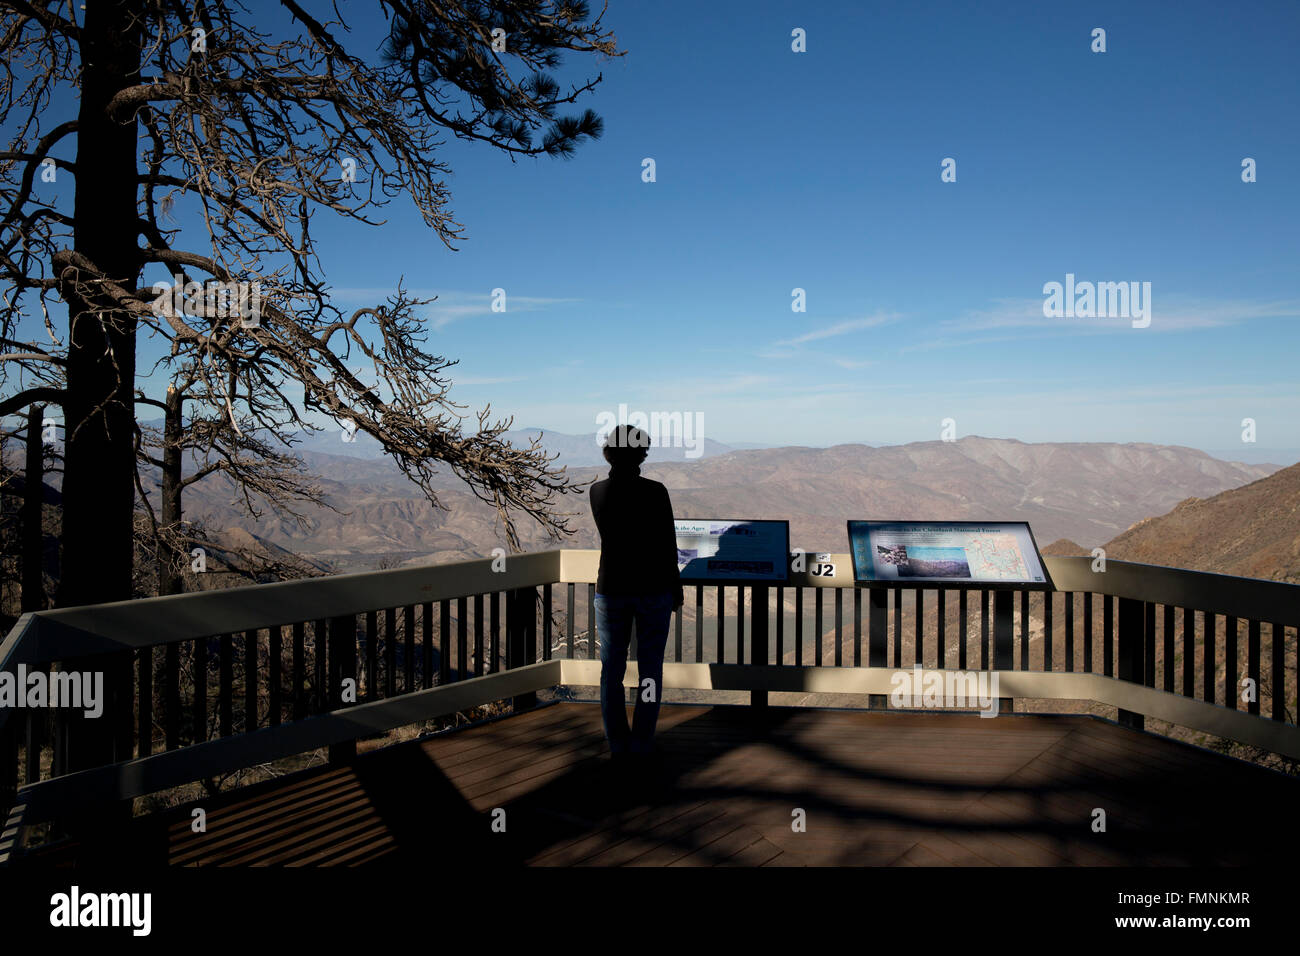 Cleveland National Forest overlook, California., USA Stock Photo